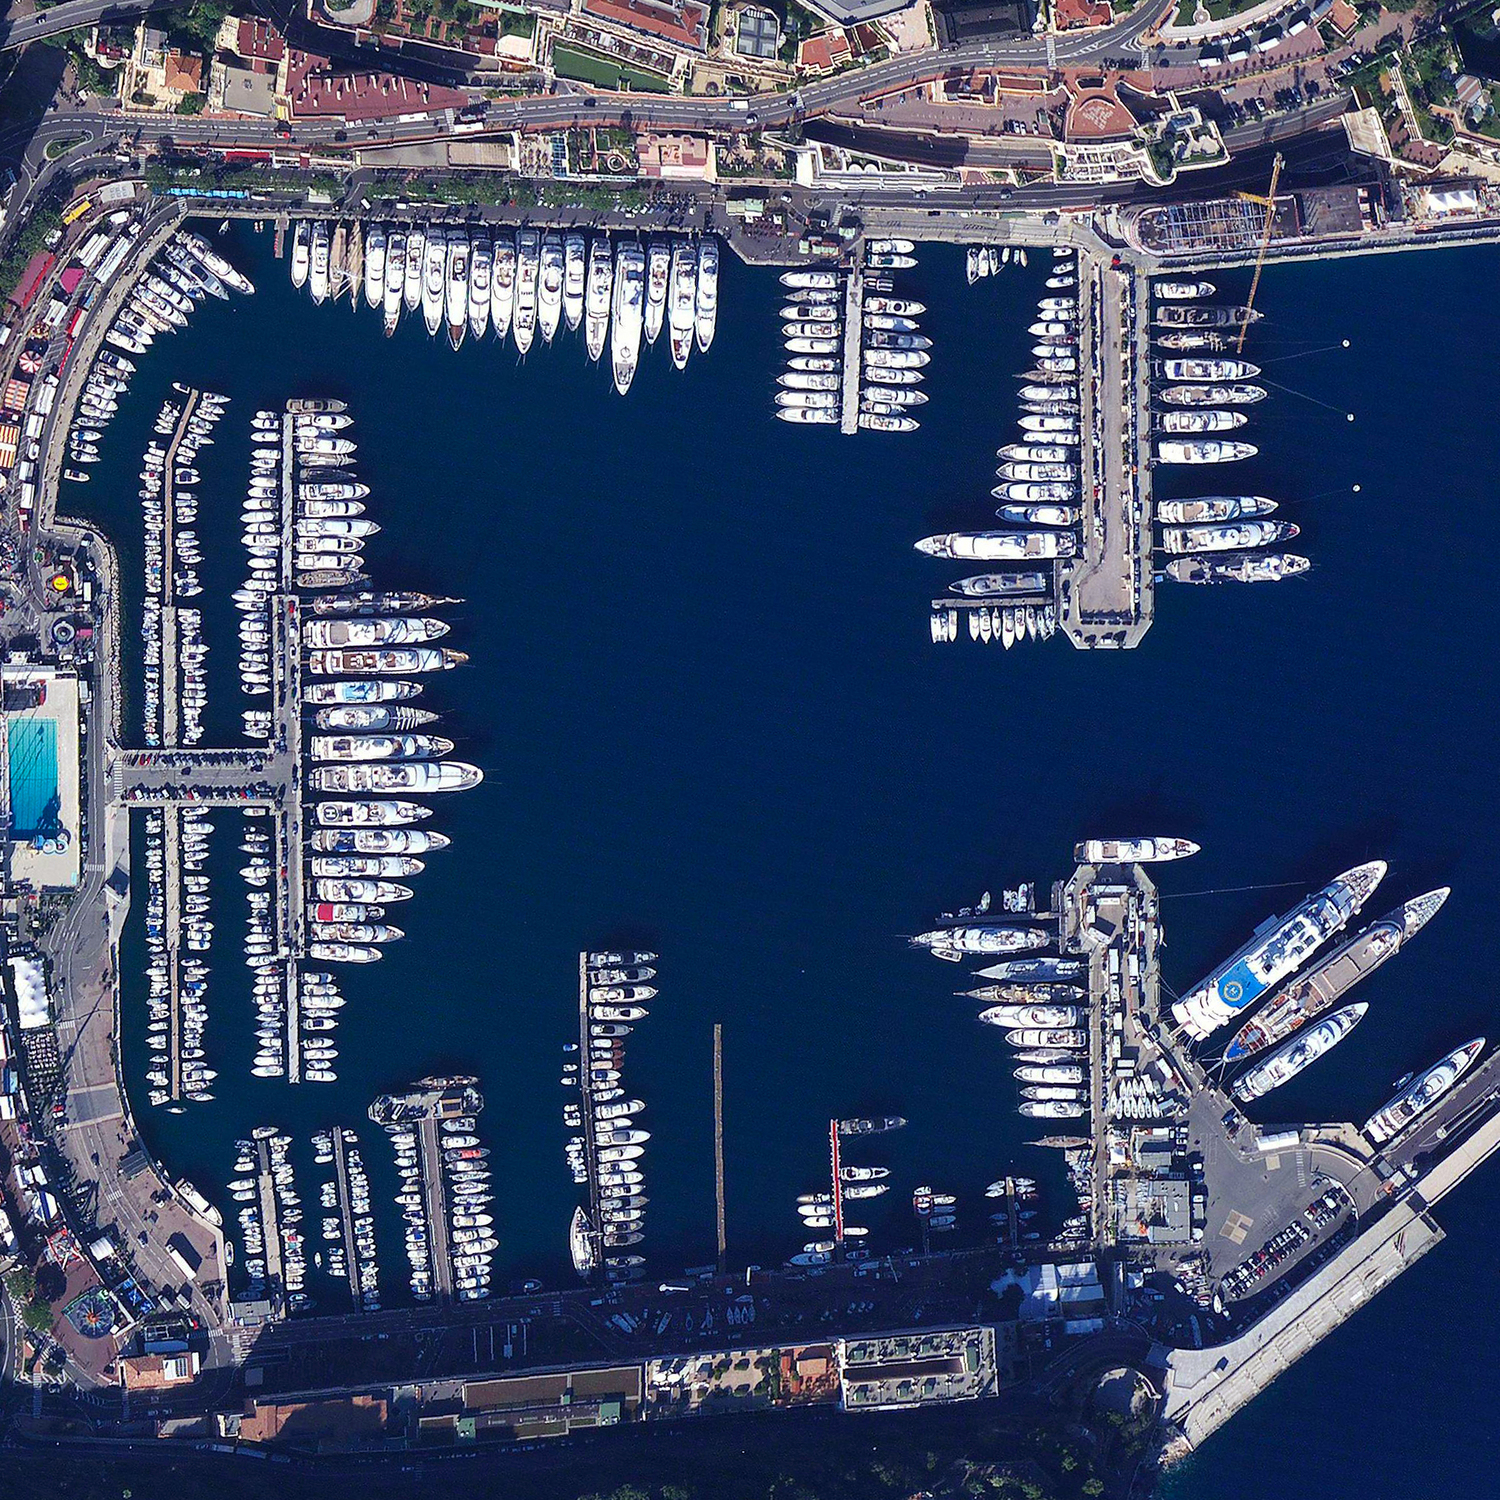   8/26/2015 Port Hercules Monaco 43.735°N 7.426°E   Port Hercules, the only deep-water port in Monaco, provides anchorage for up to 700 vessels. Monaco has an area of 0.78 square miles and a population of 36,371, making it the second smallest and the most densely populated country in the world.